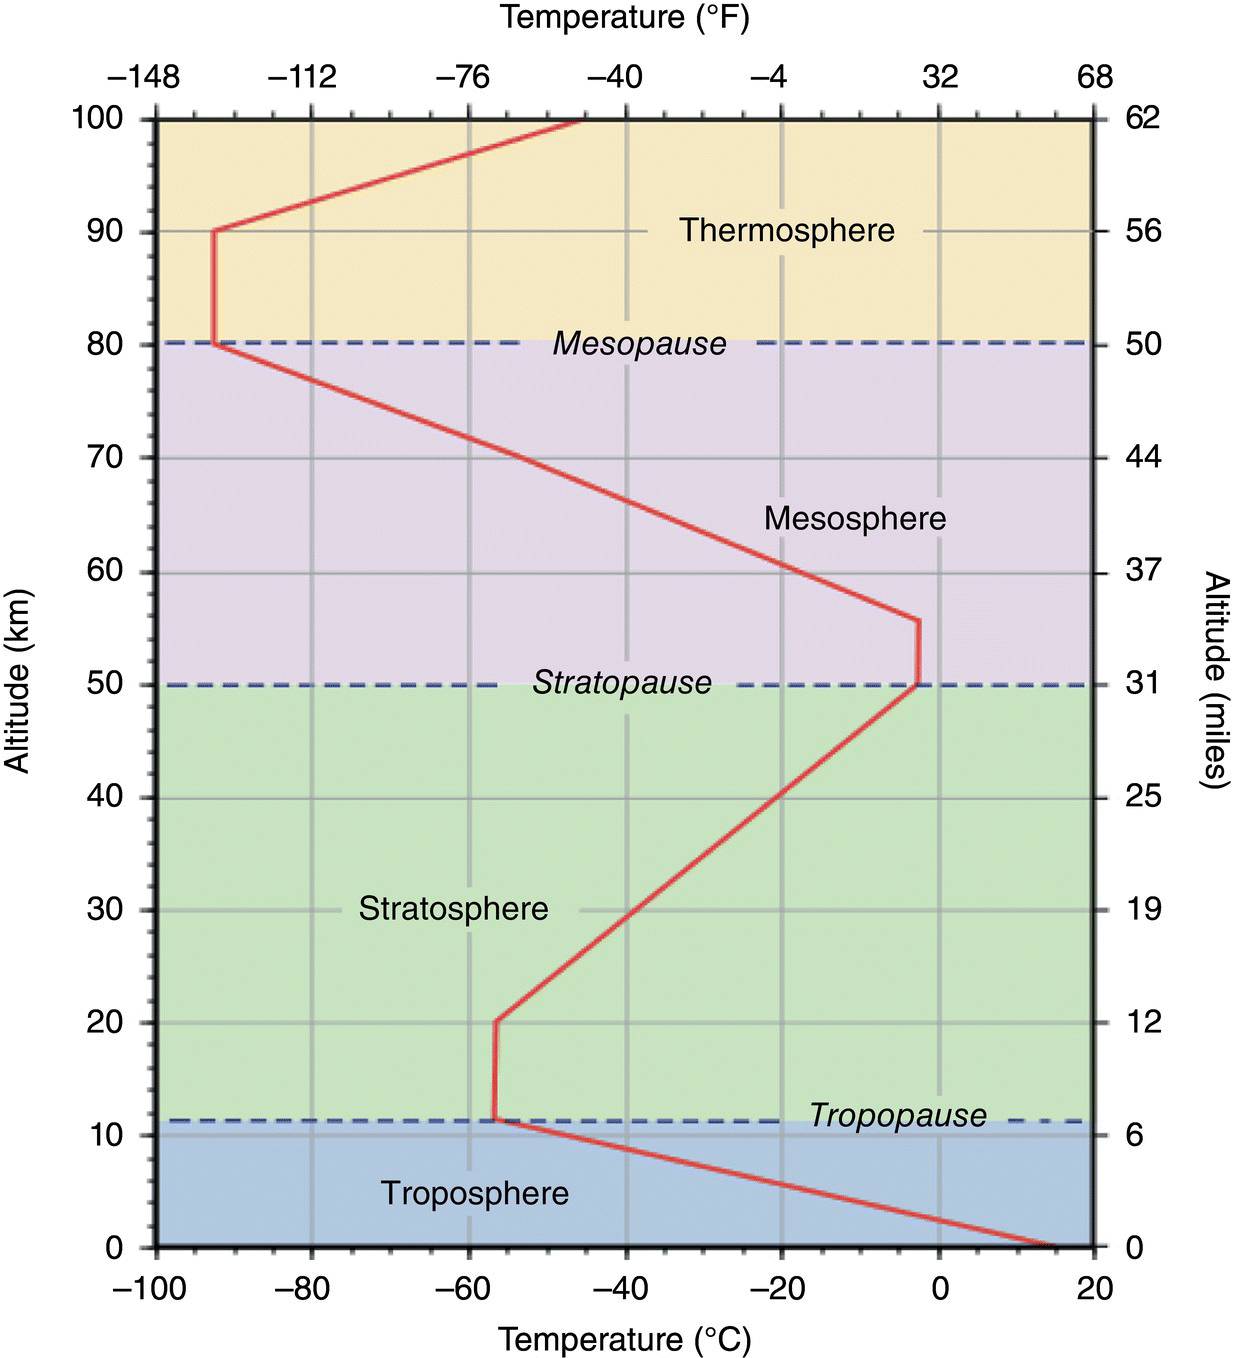 Graph of altitude (km) versus temperature (°C) displaying a descending solid curve, 3 horizontal dashed lines labeled Tropopause, Stratopause, and Mesopause, and segments for troposphere, stratosphere, etc.